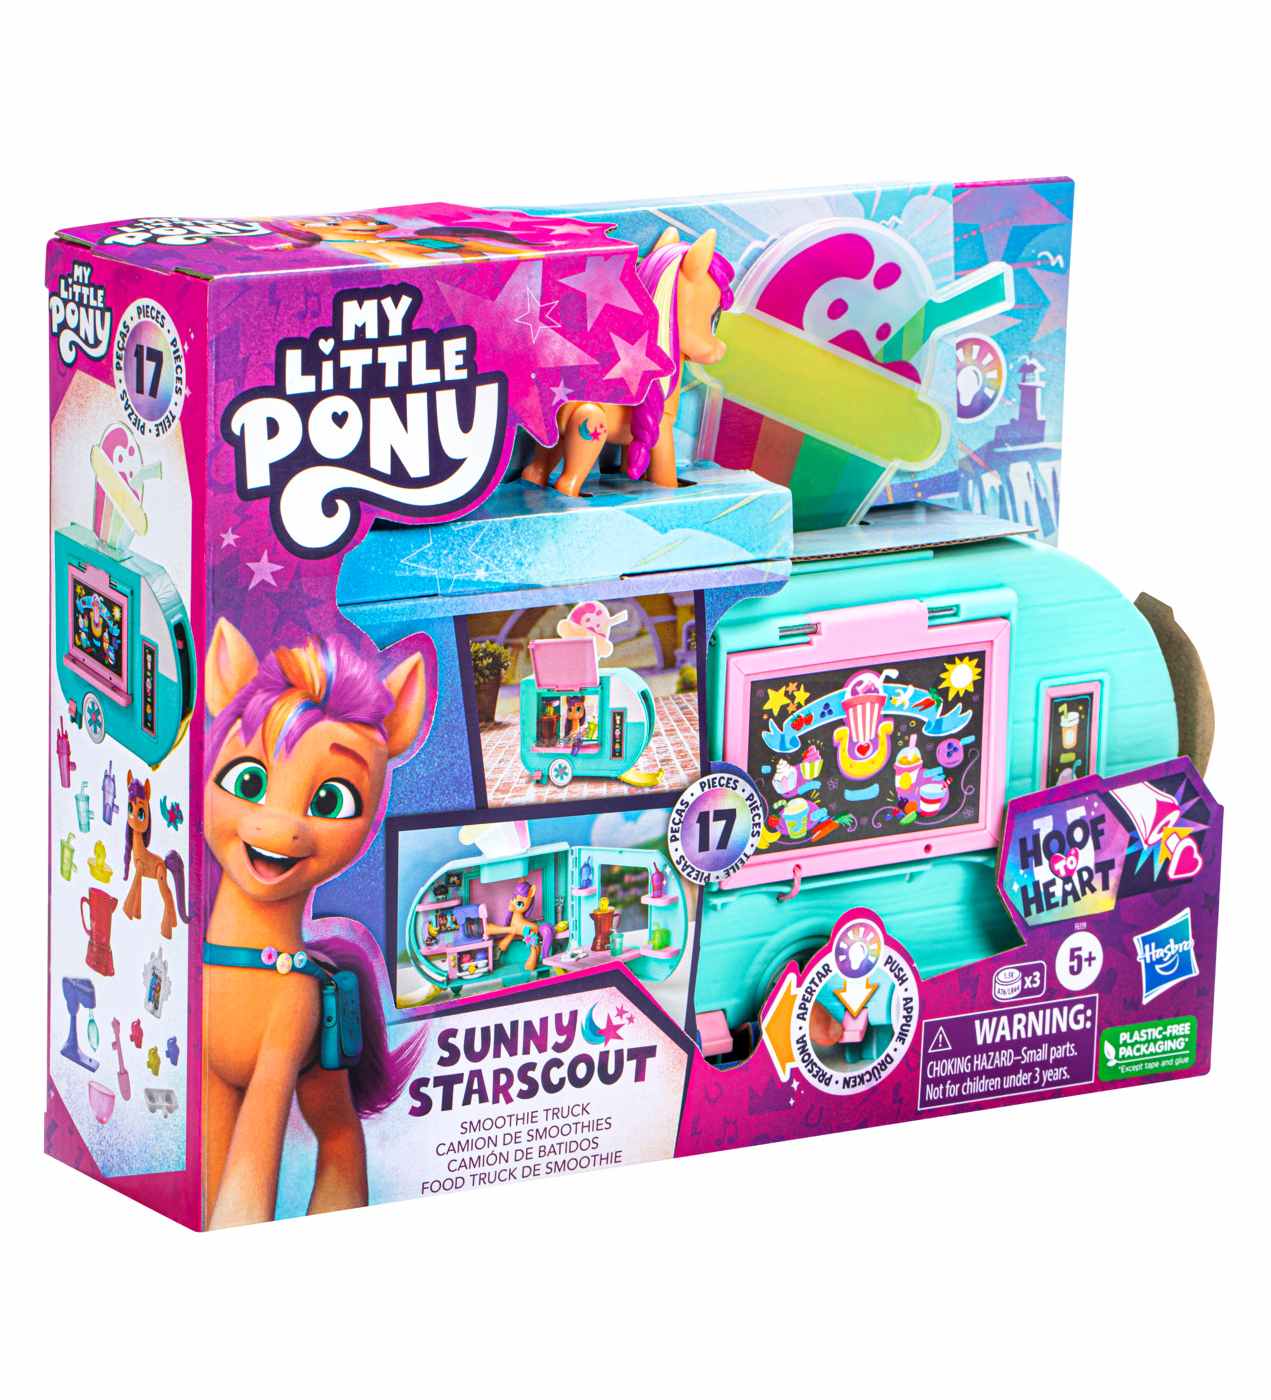 My Little Pony Toys Sunny Starscout Smoothie Truck Doll, Kids